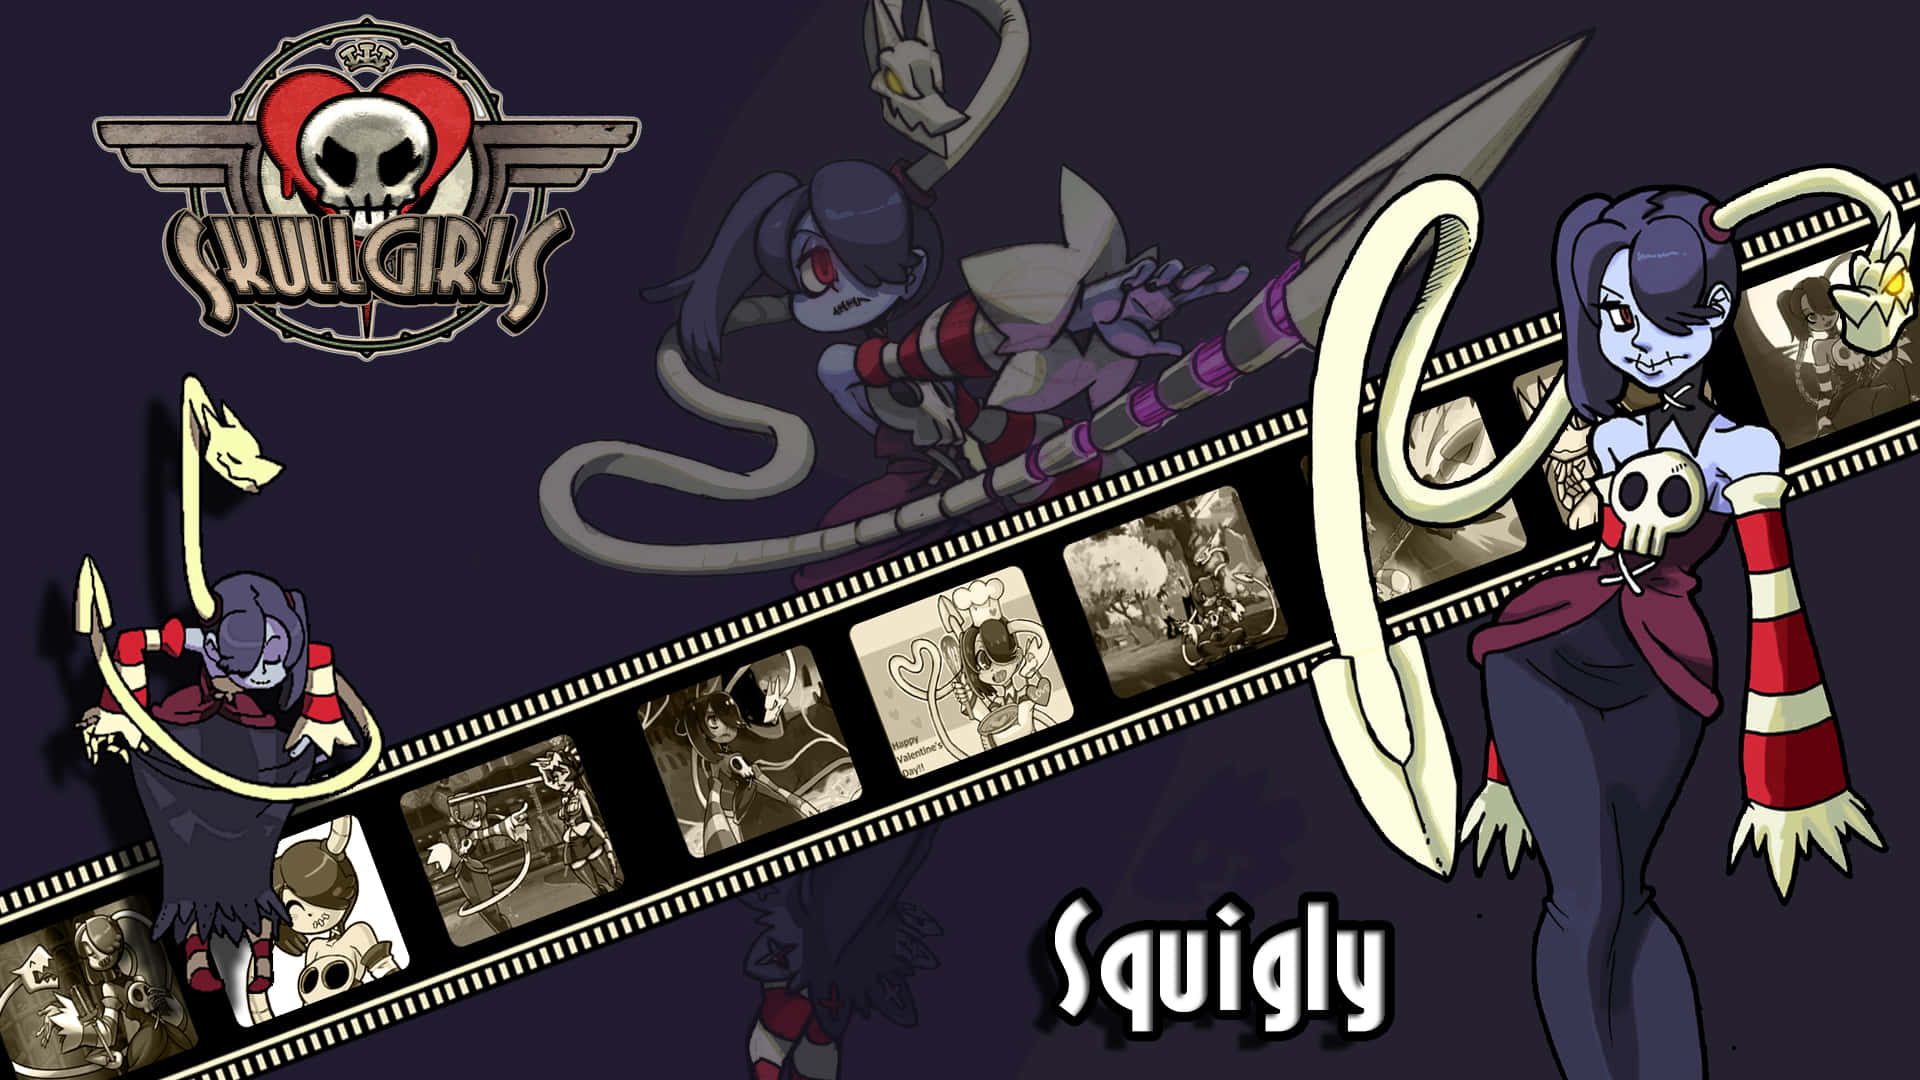 Squigly From Skullgirls Film Tape Wallpaper